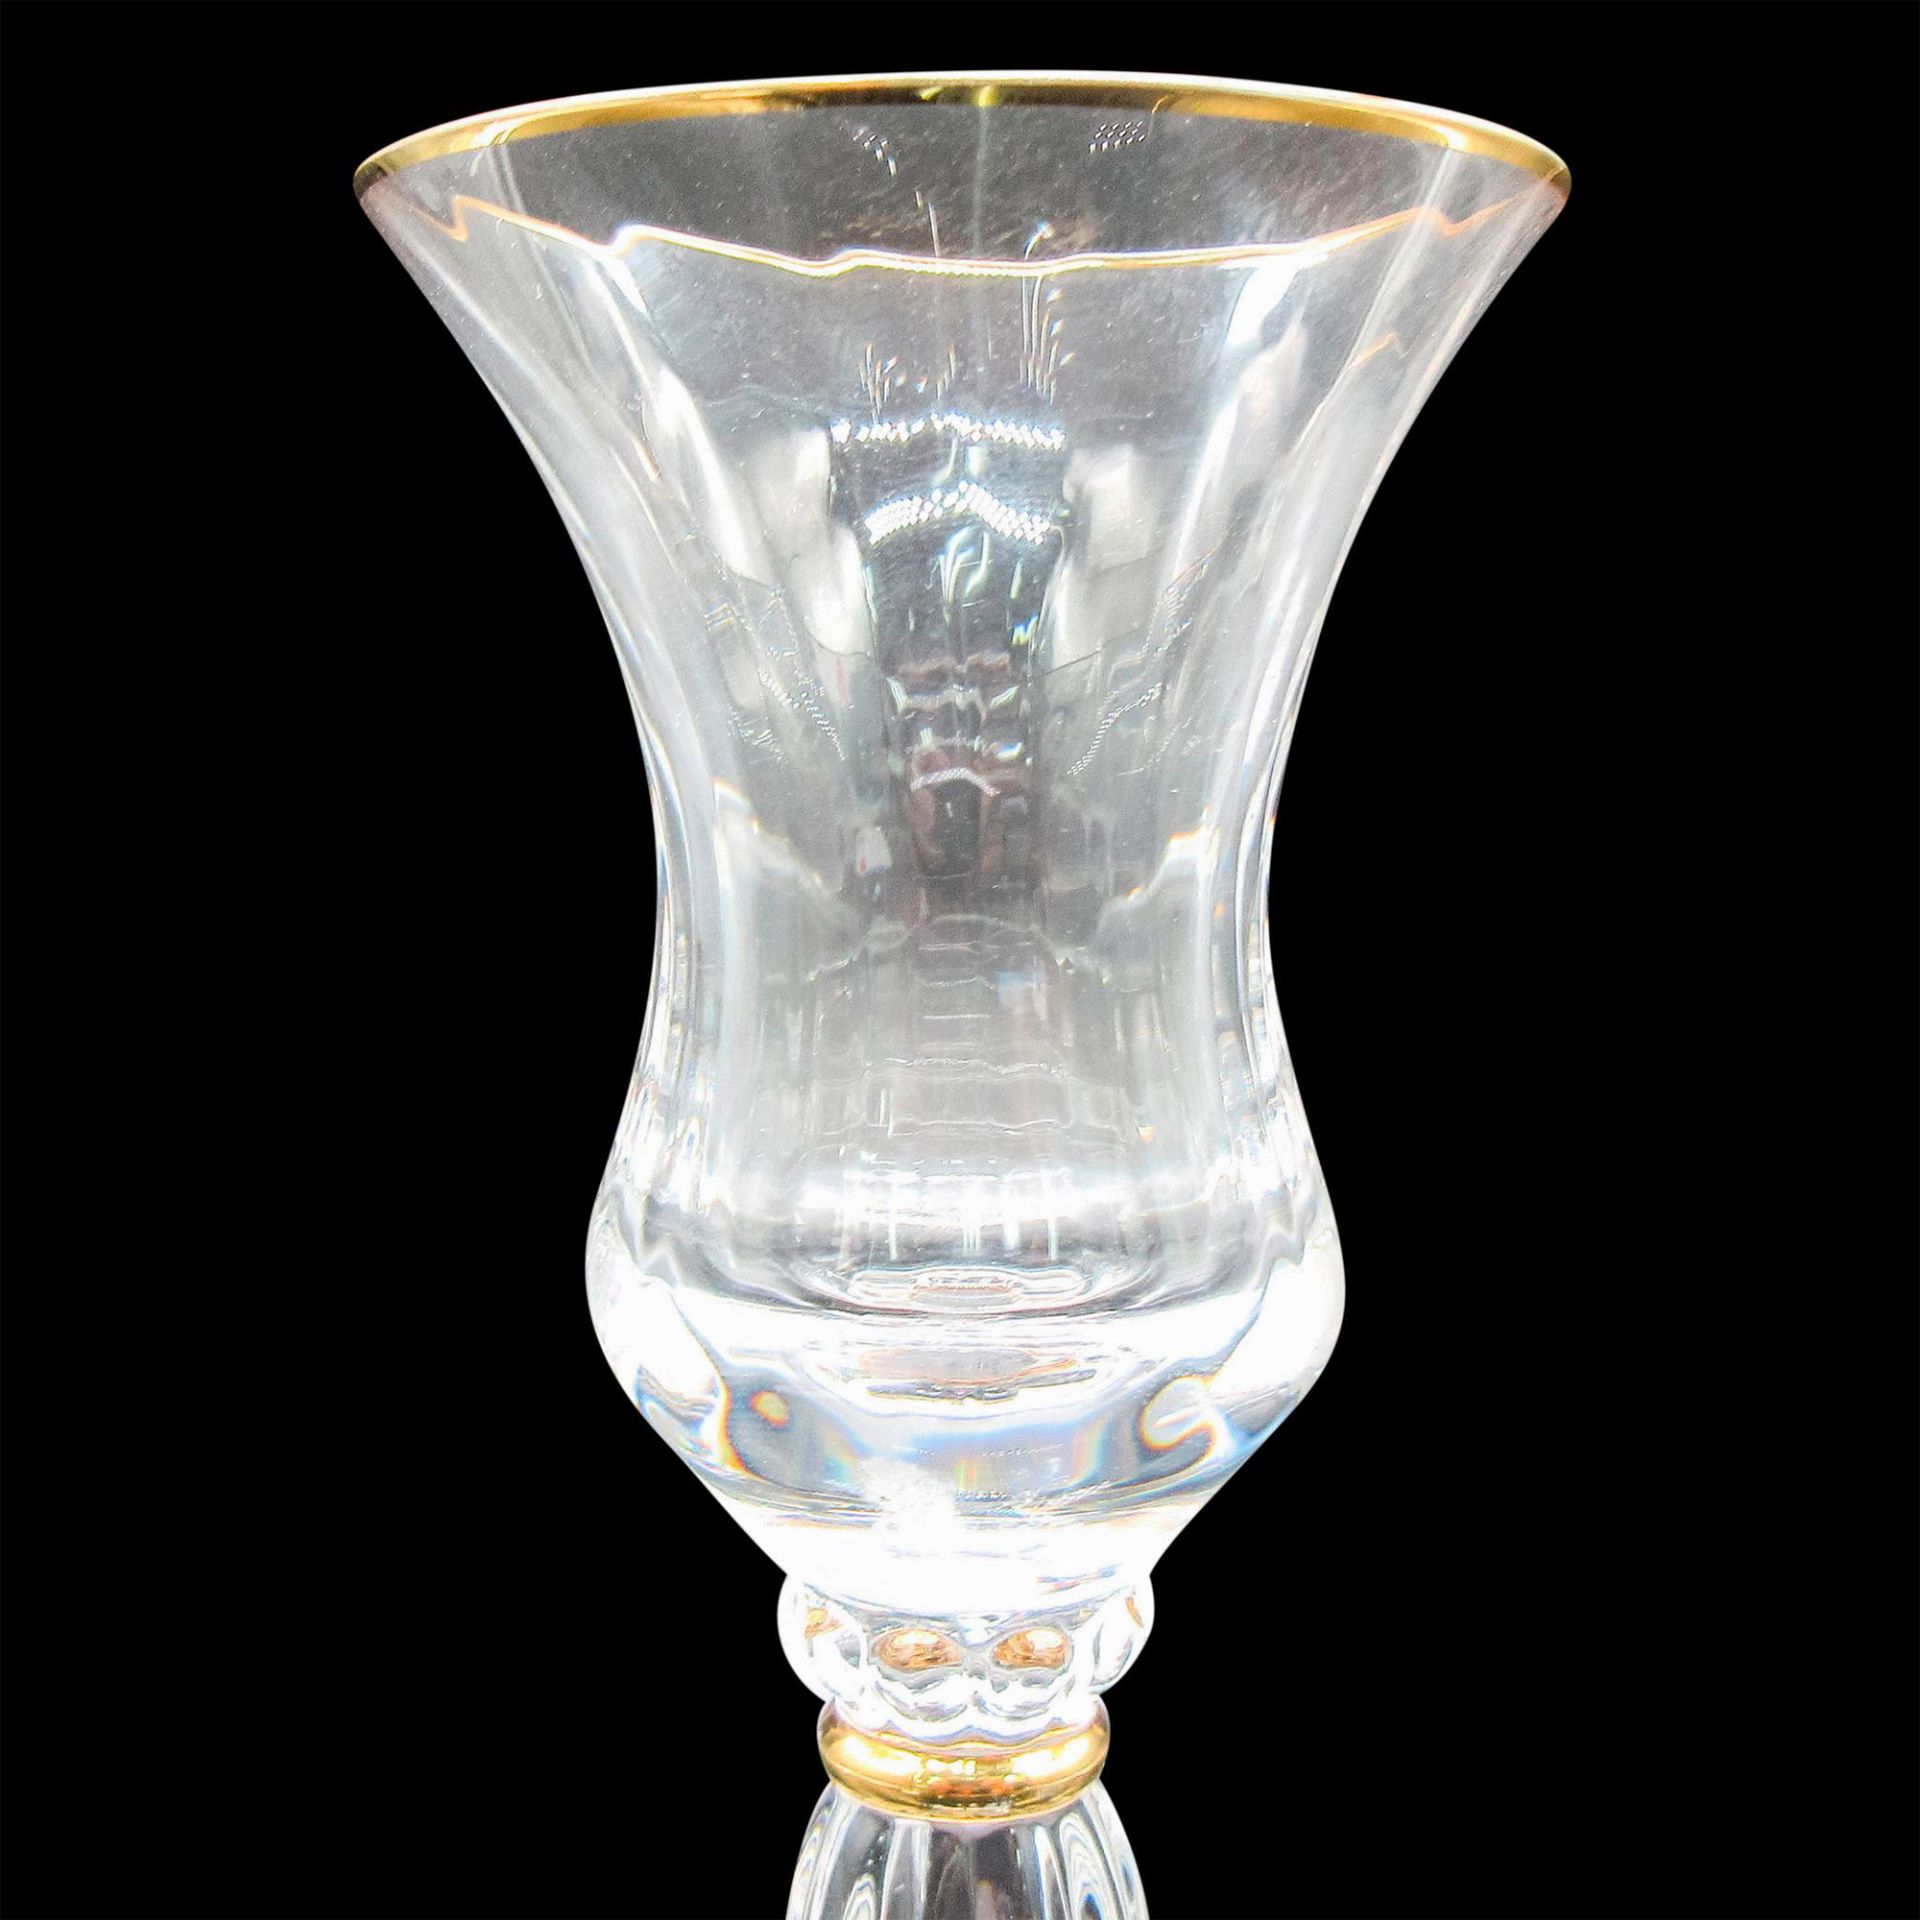 Mikasa Crystal Candle Holder - Image 3 of 3